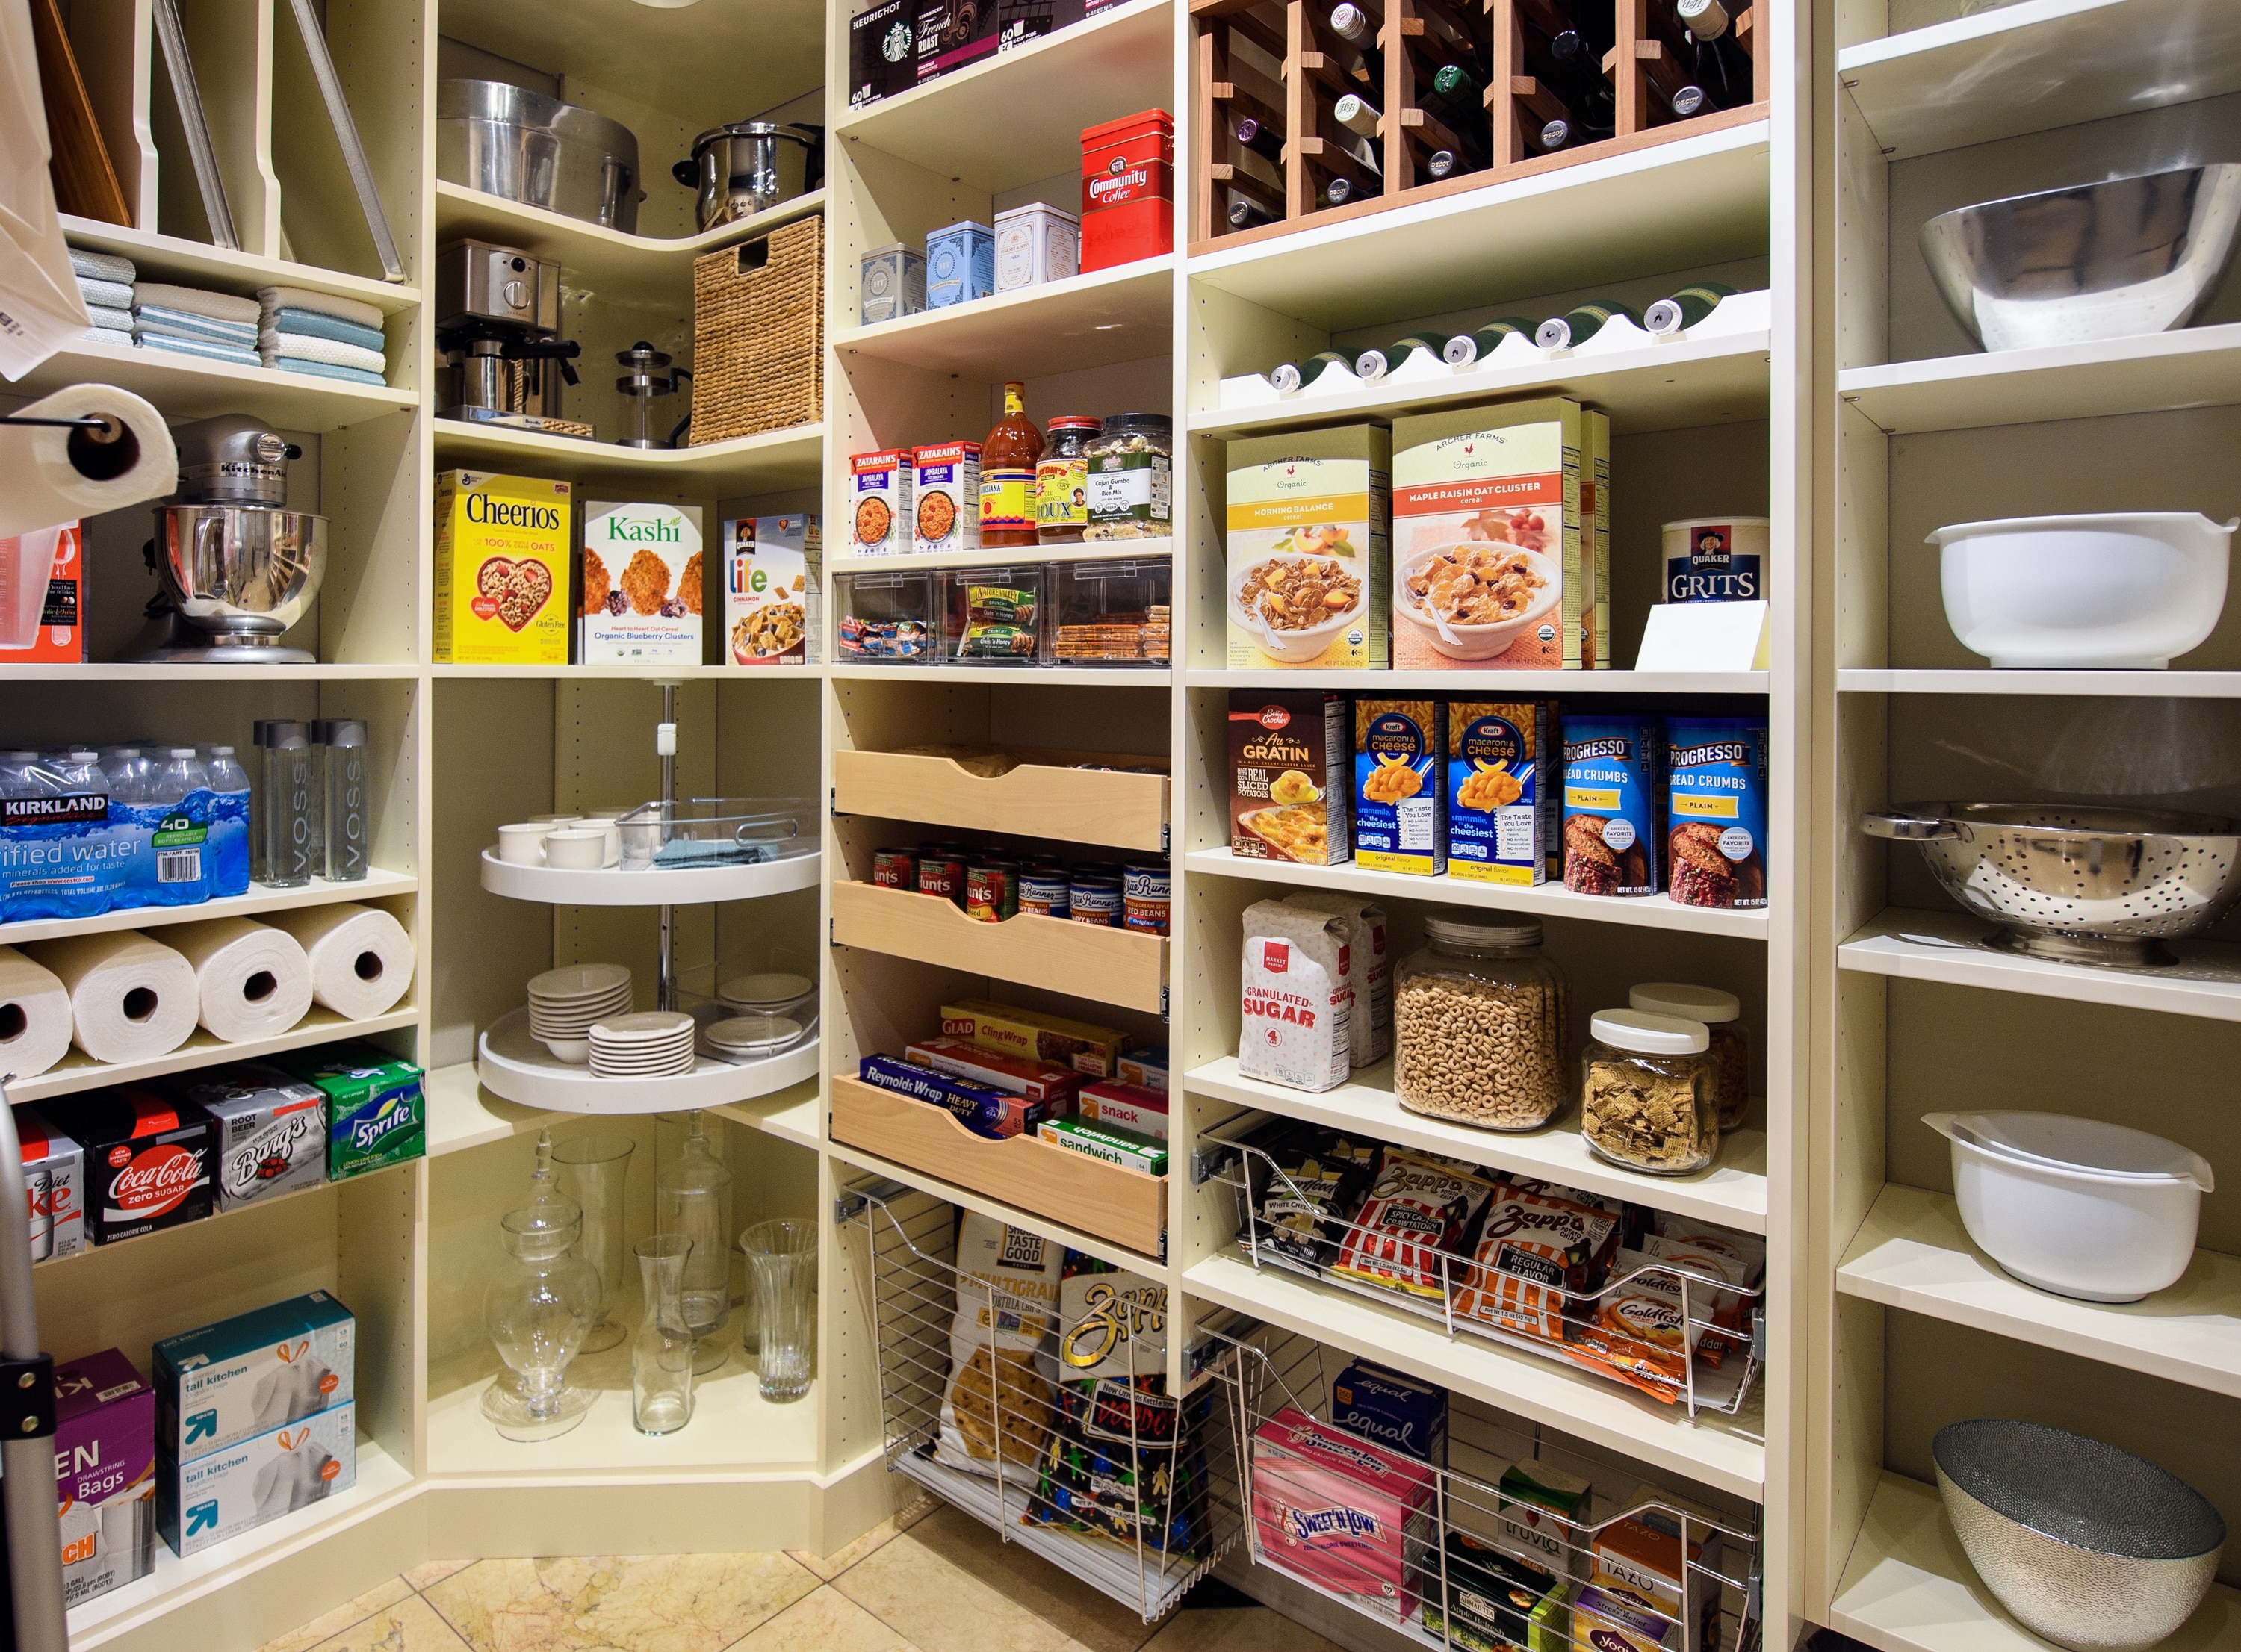 Pantry showing food on shelves